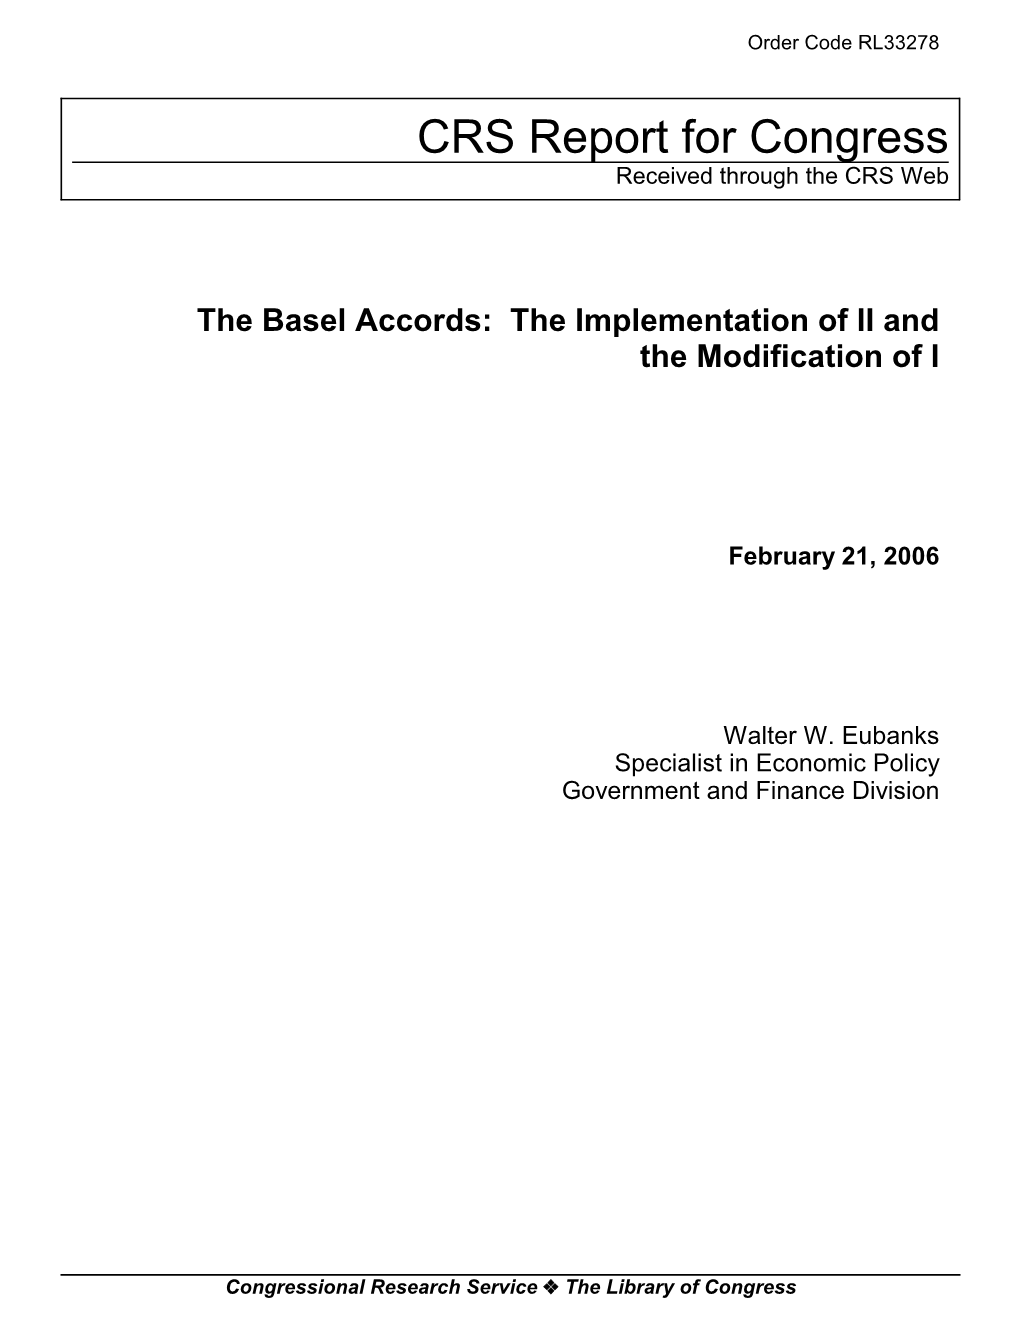 The Basel Accords: the Implementation of II and the Modification of I